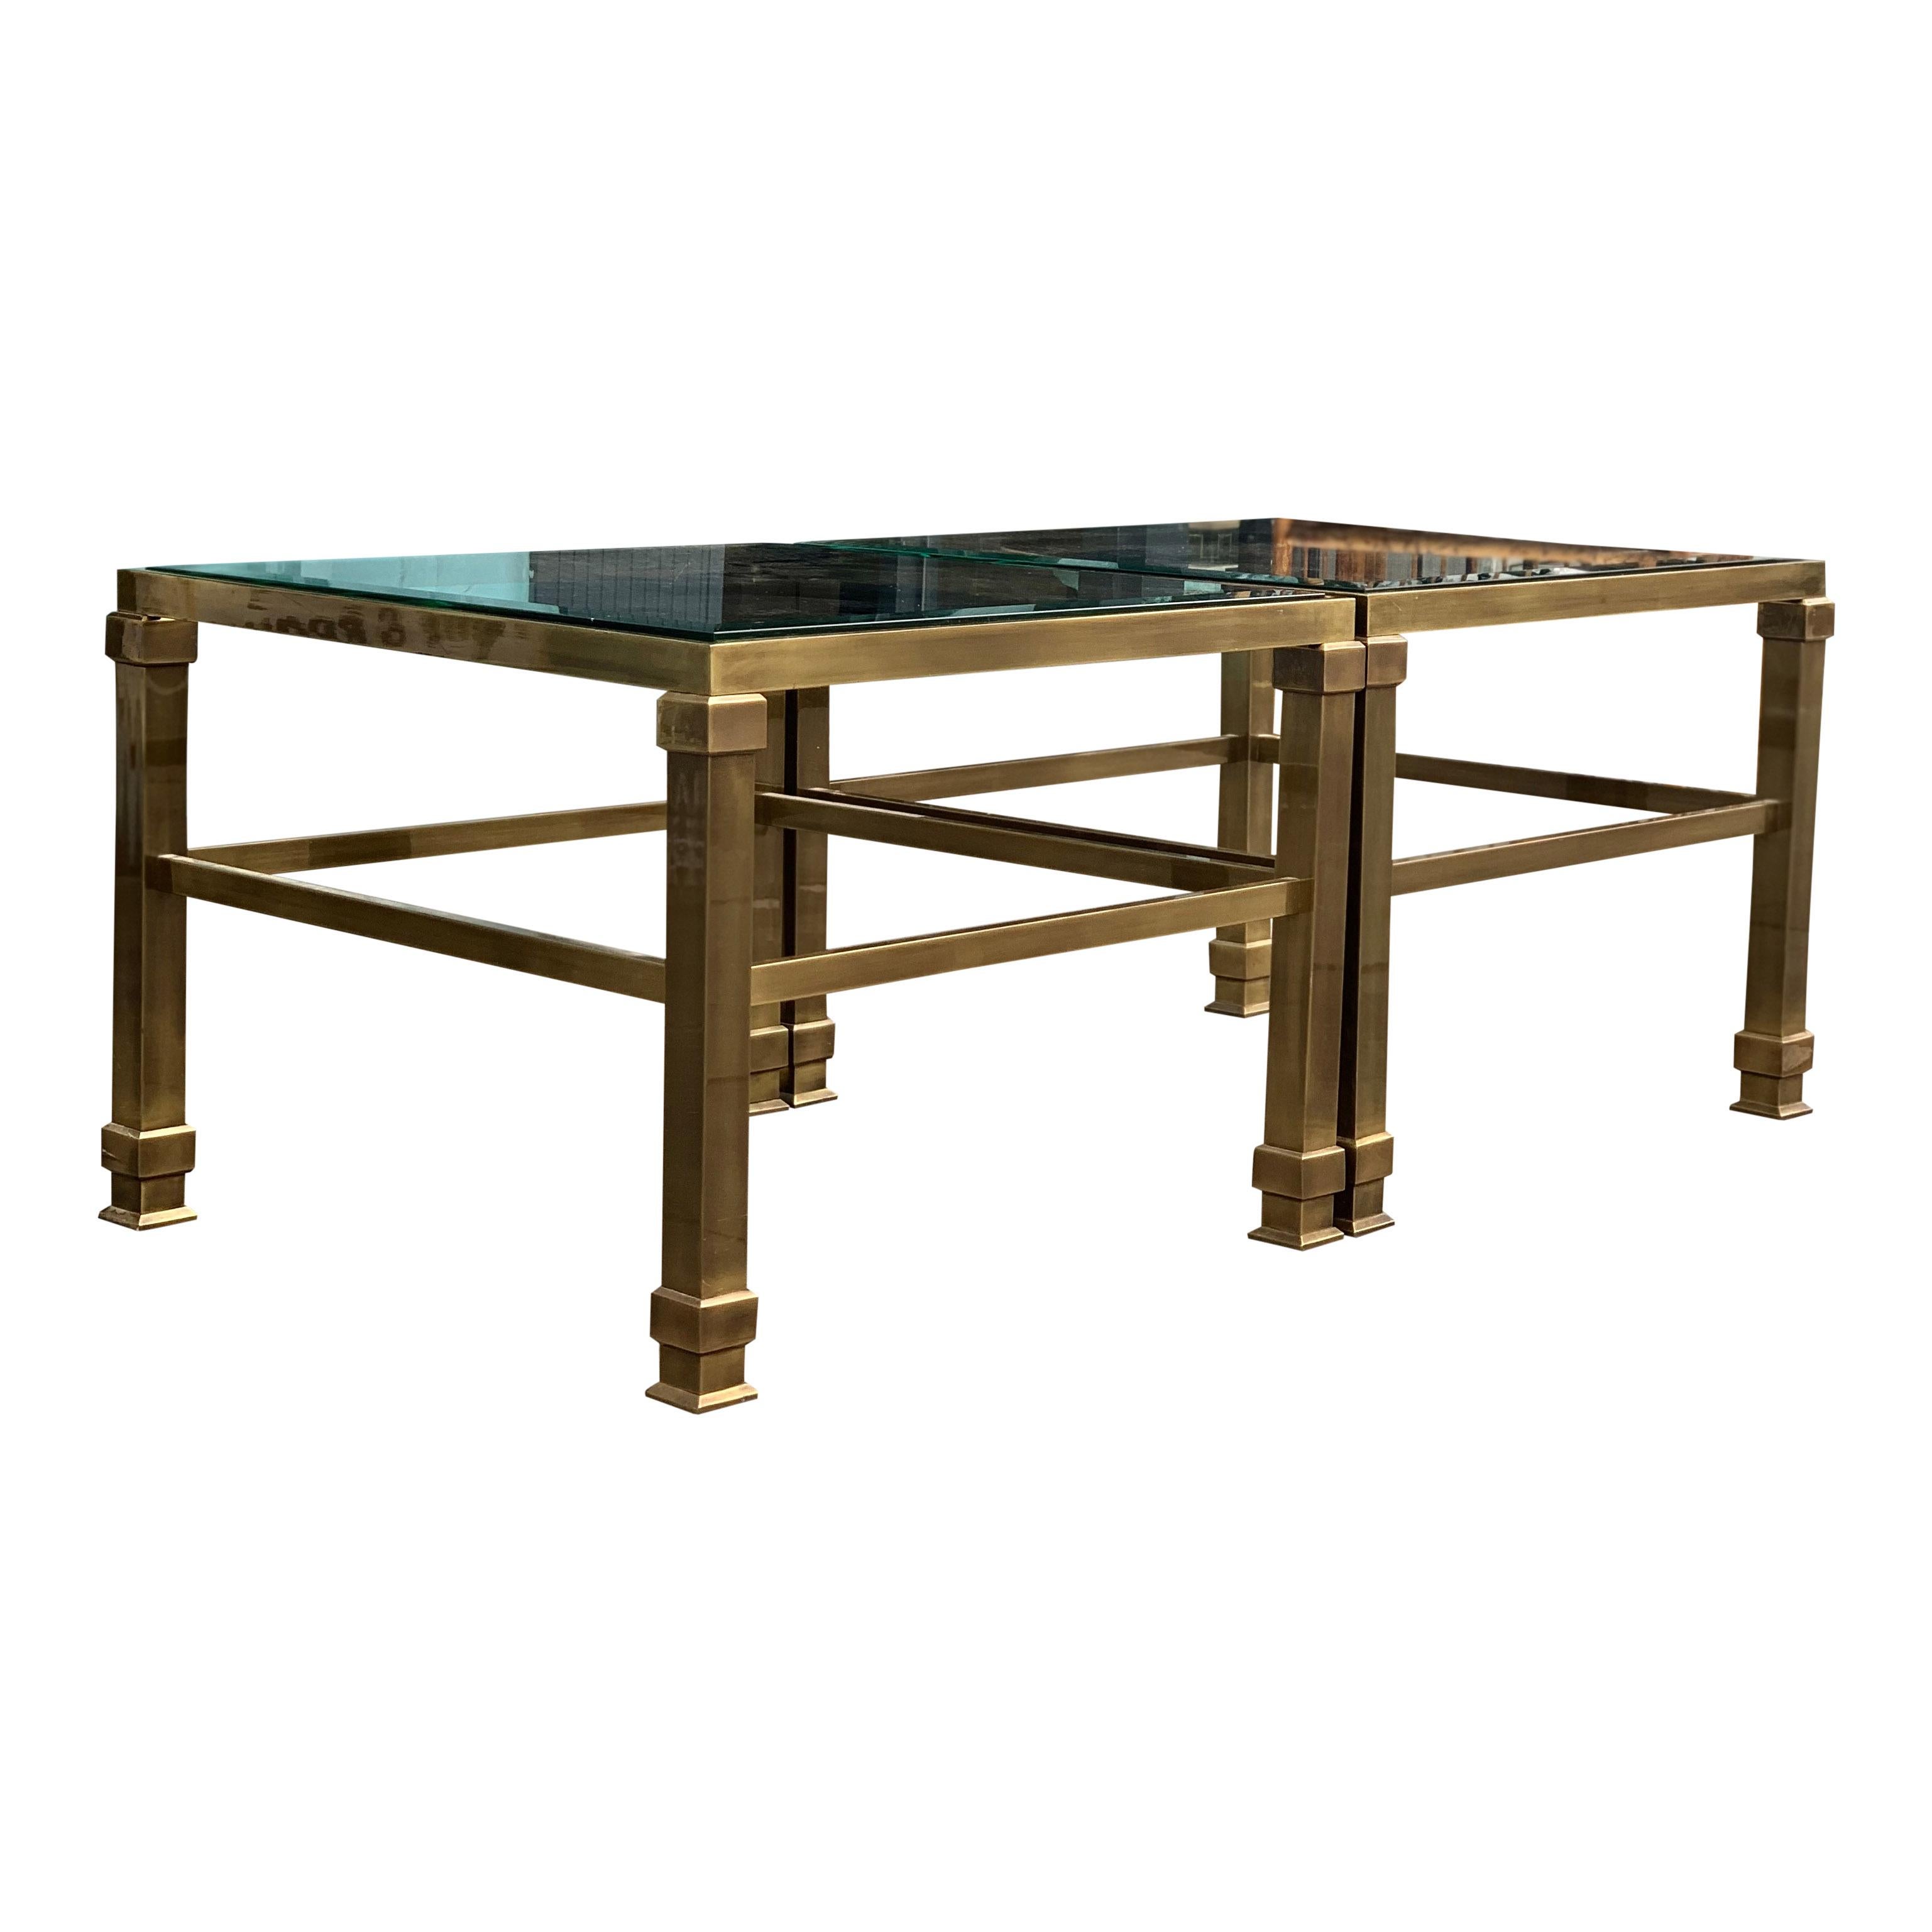 A strong, bold, masculine looking pair of 20th century brass side tables.

If you check my listing this is the second pair of these side tables so x4 together could look very good.